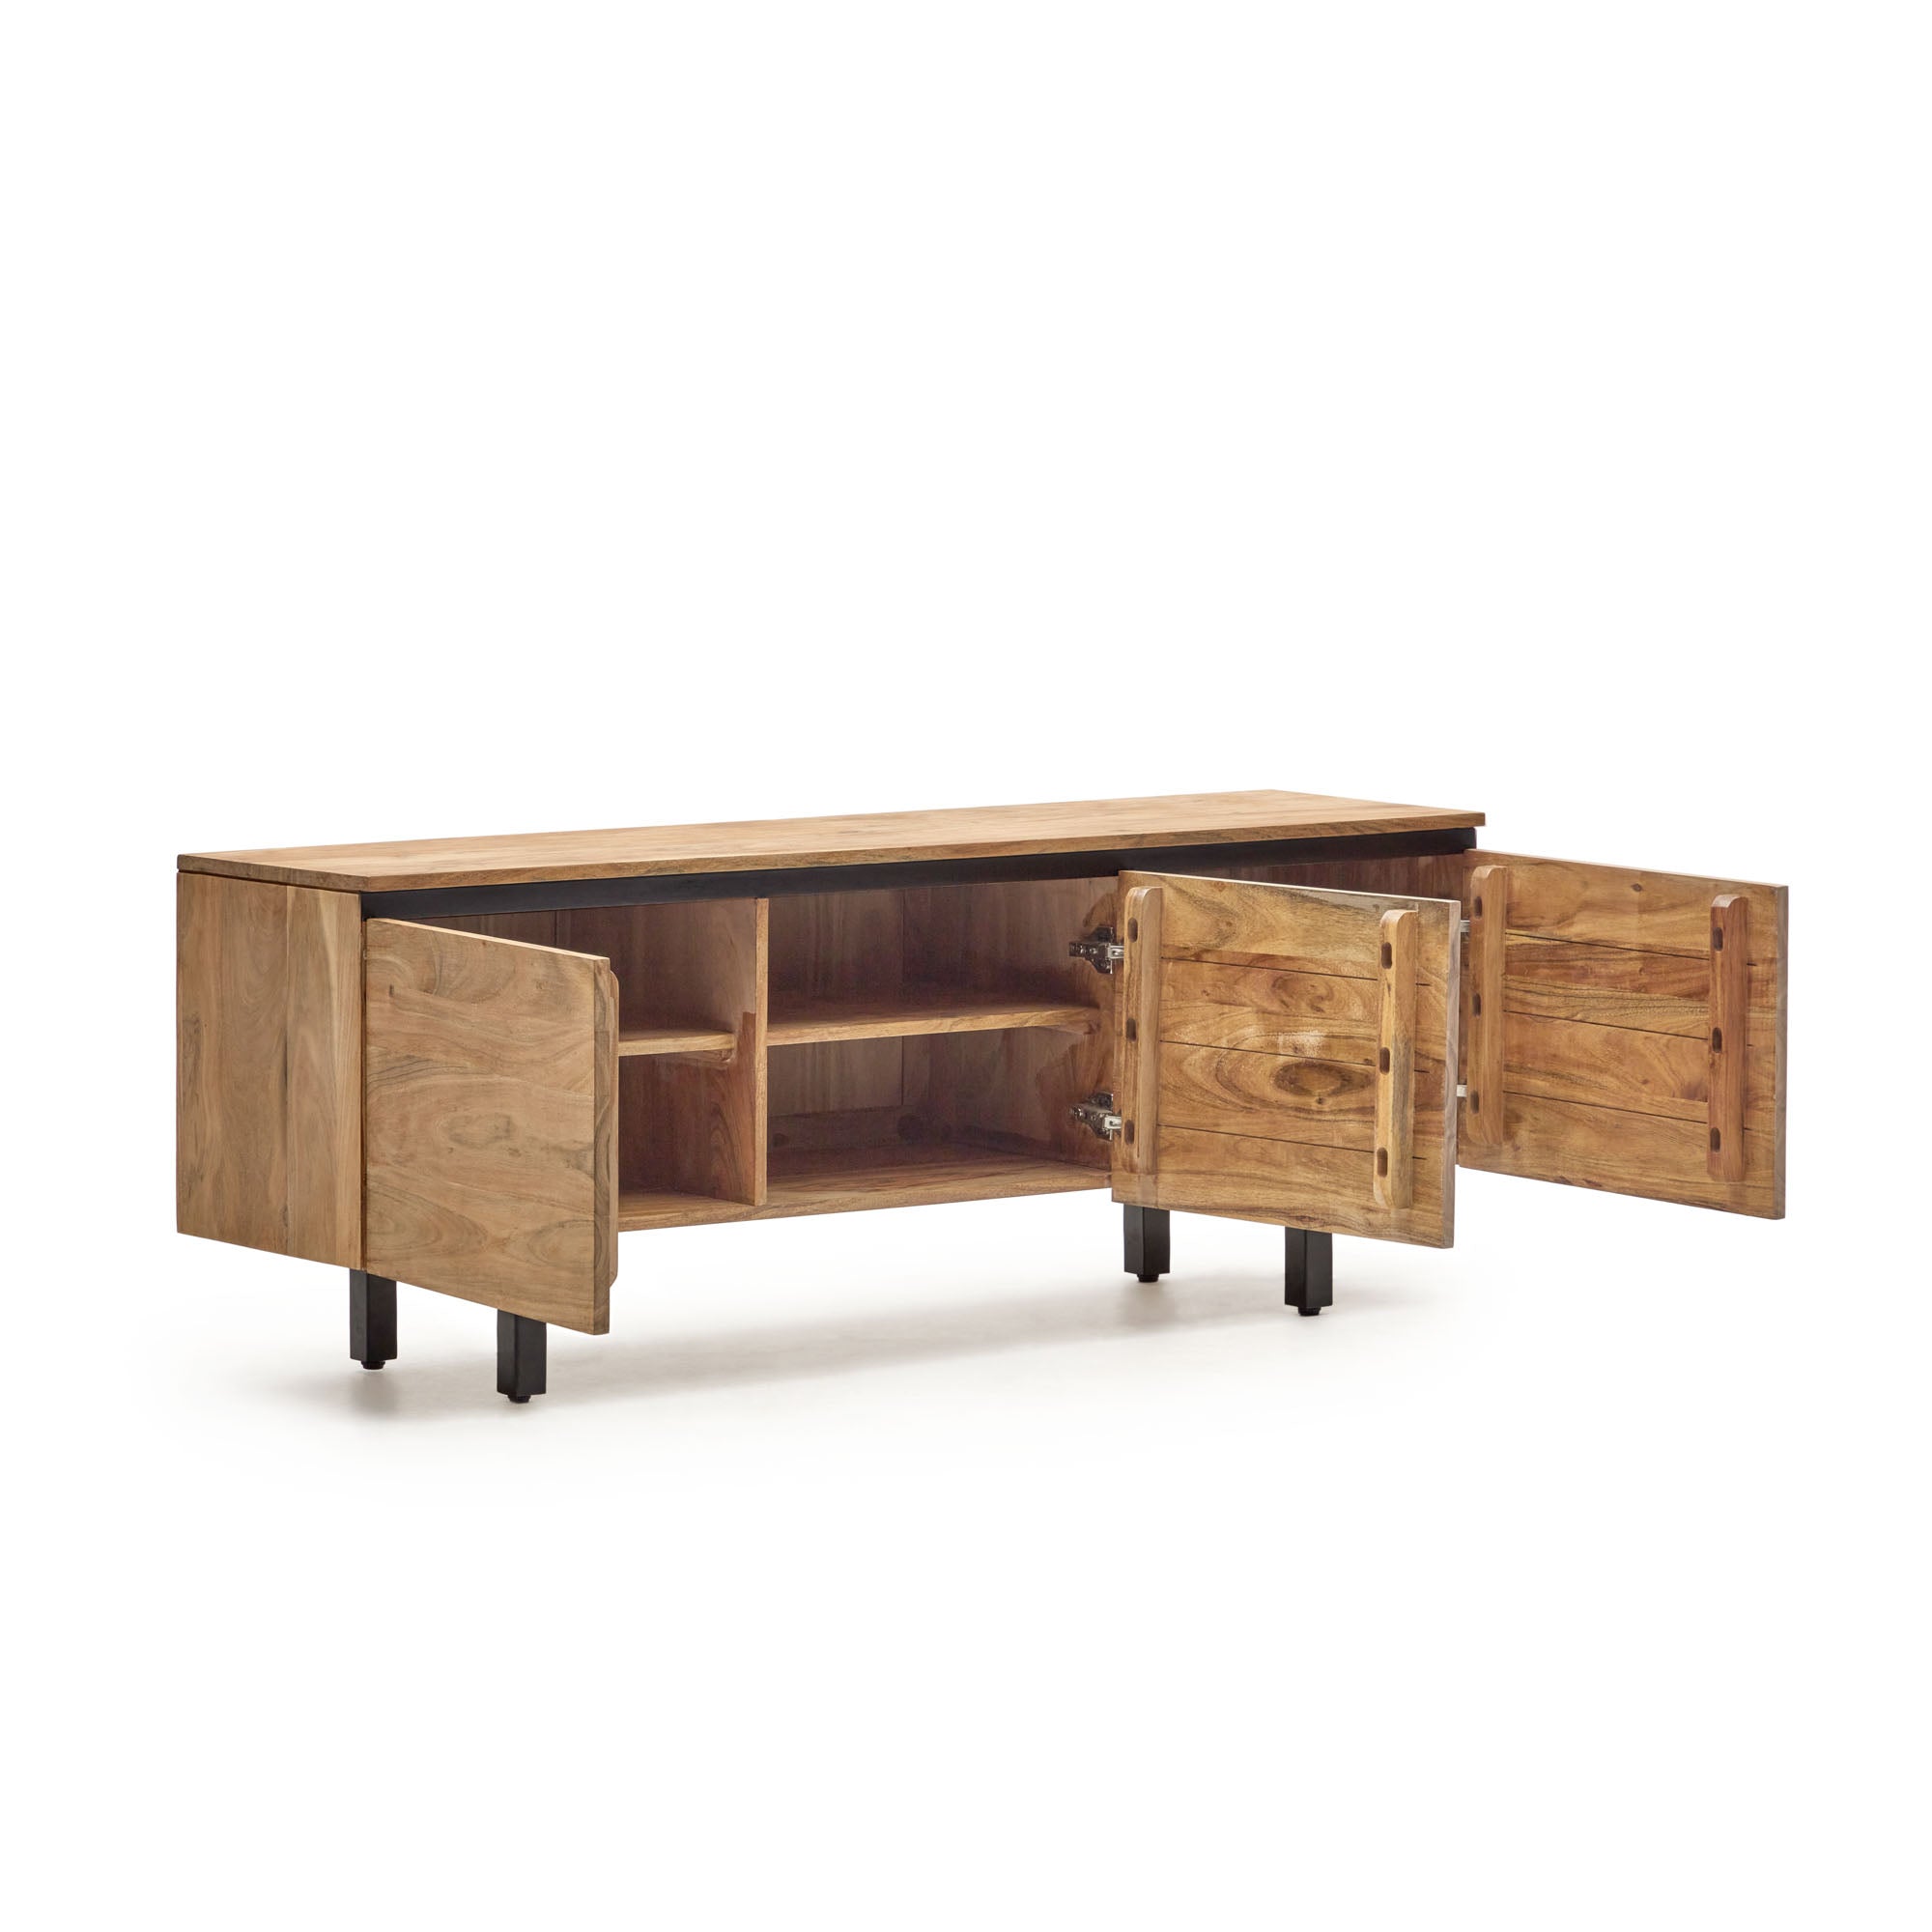 Uxue TV stand with 3 solid acacia wood doors in a natural finish, 150 x 58 cm